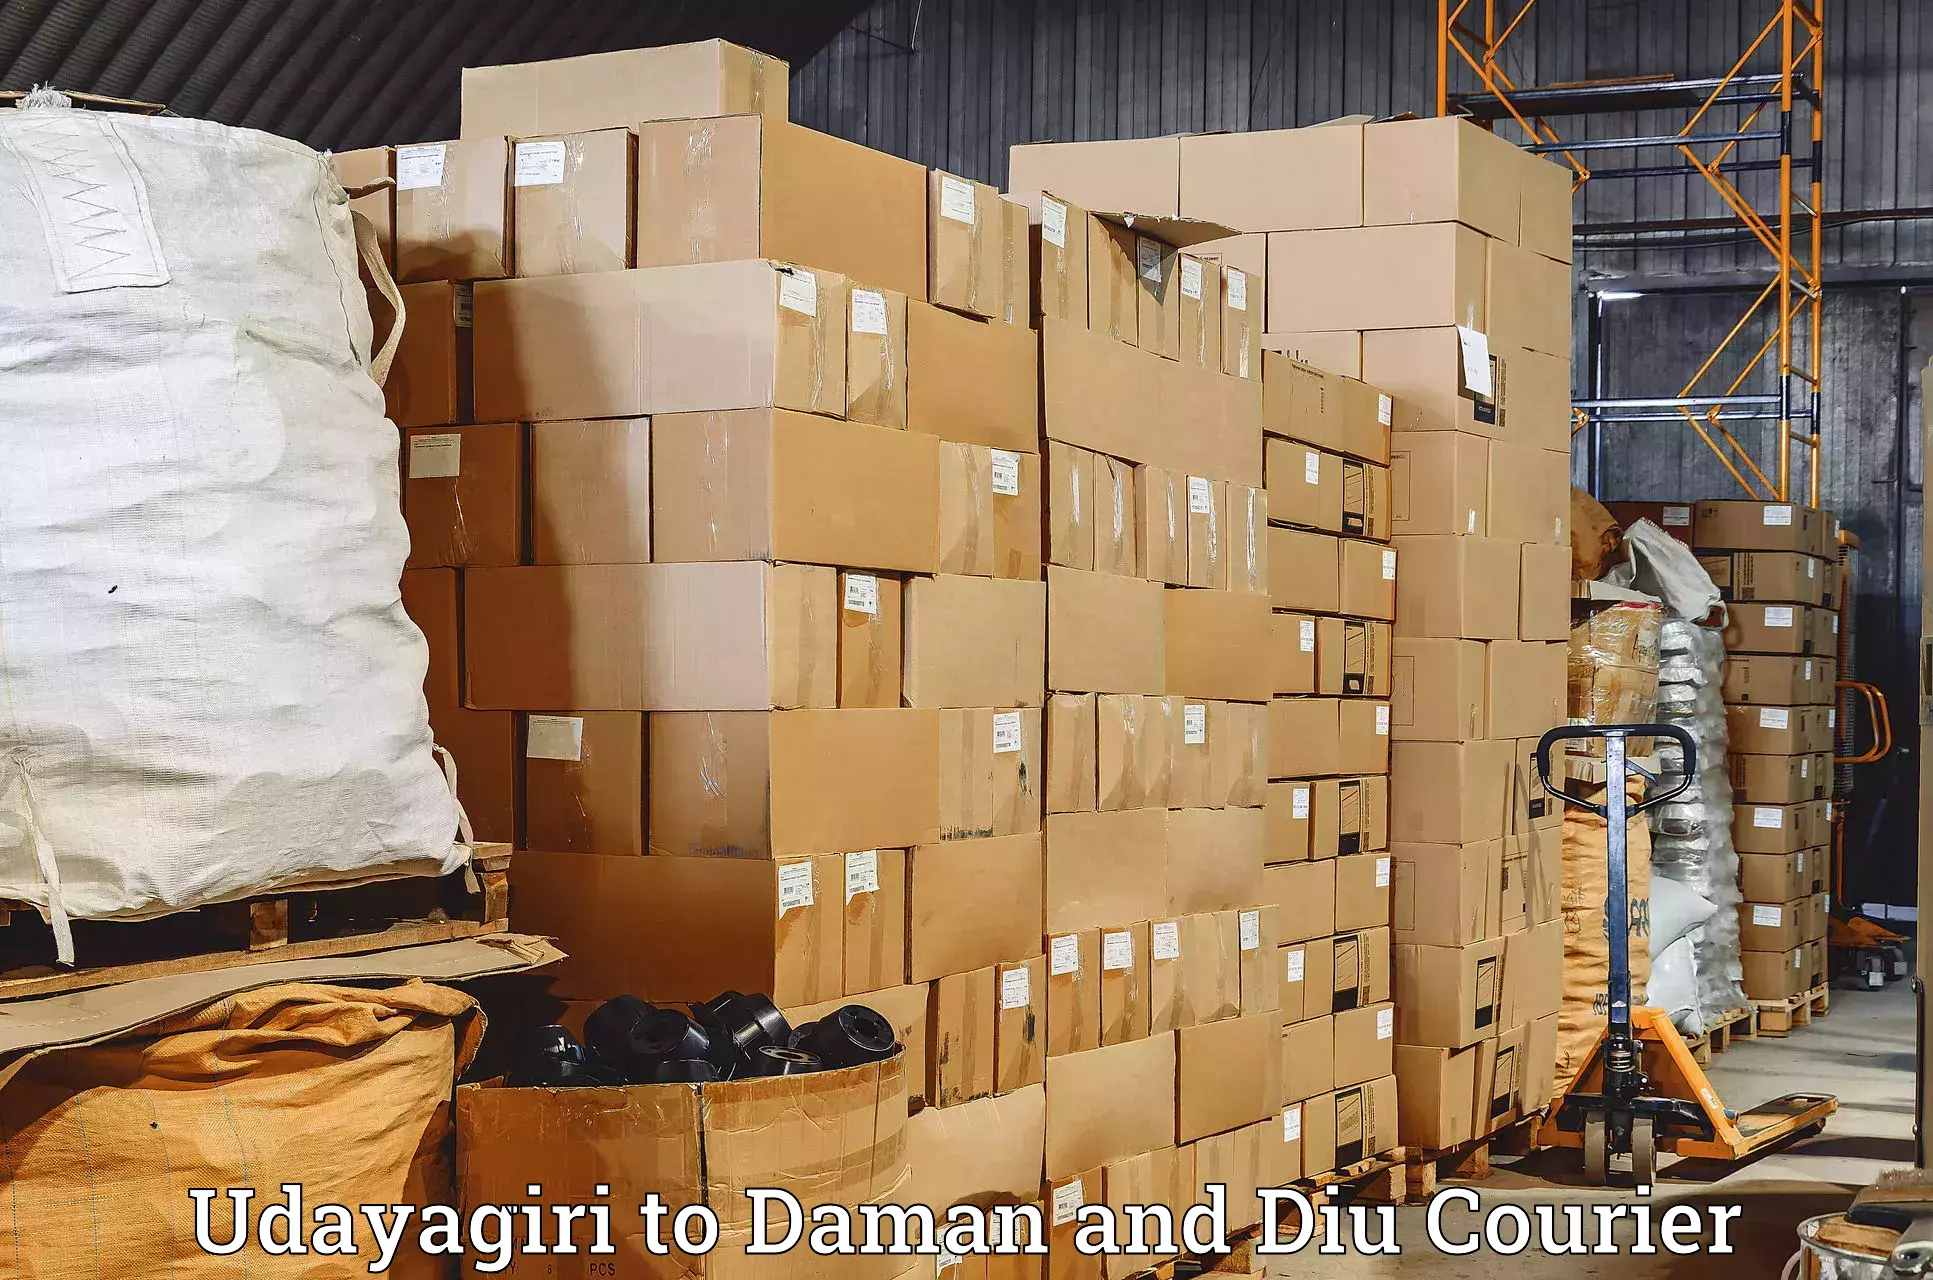 Round-the-clock parcel delivery Udayagiri to Daman